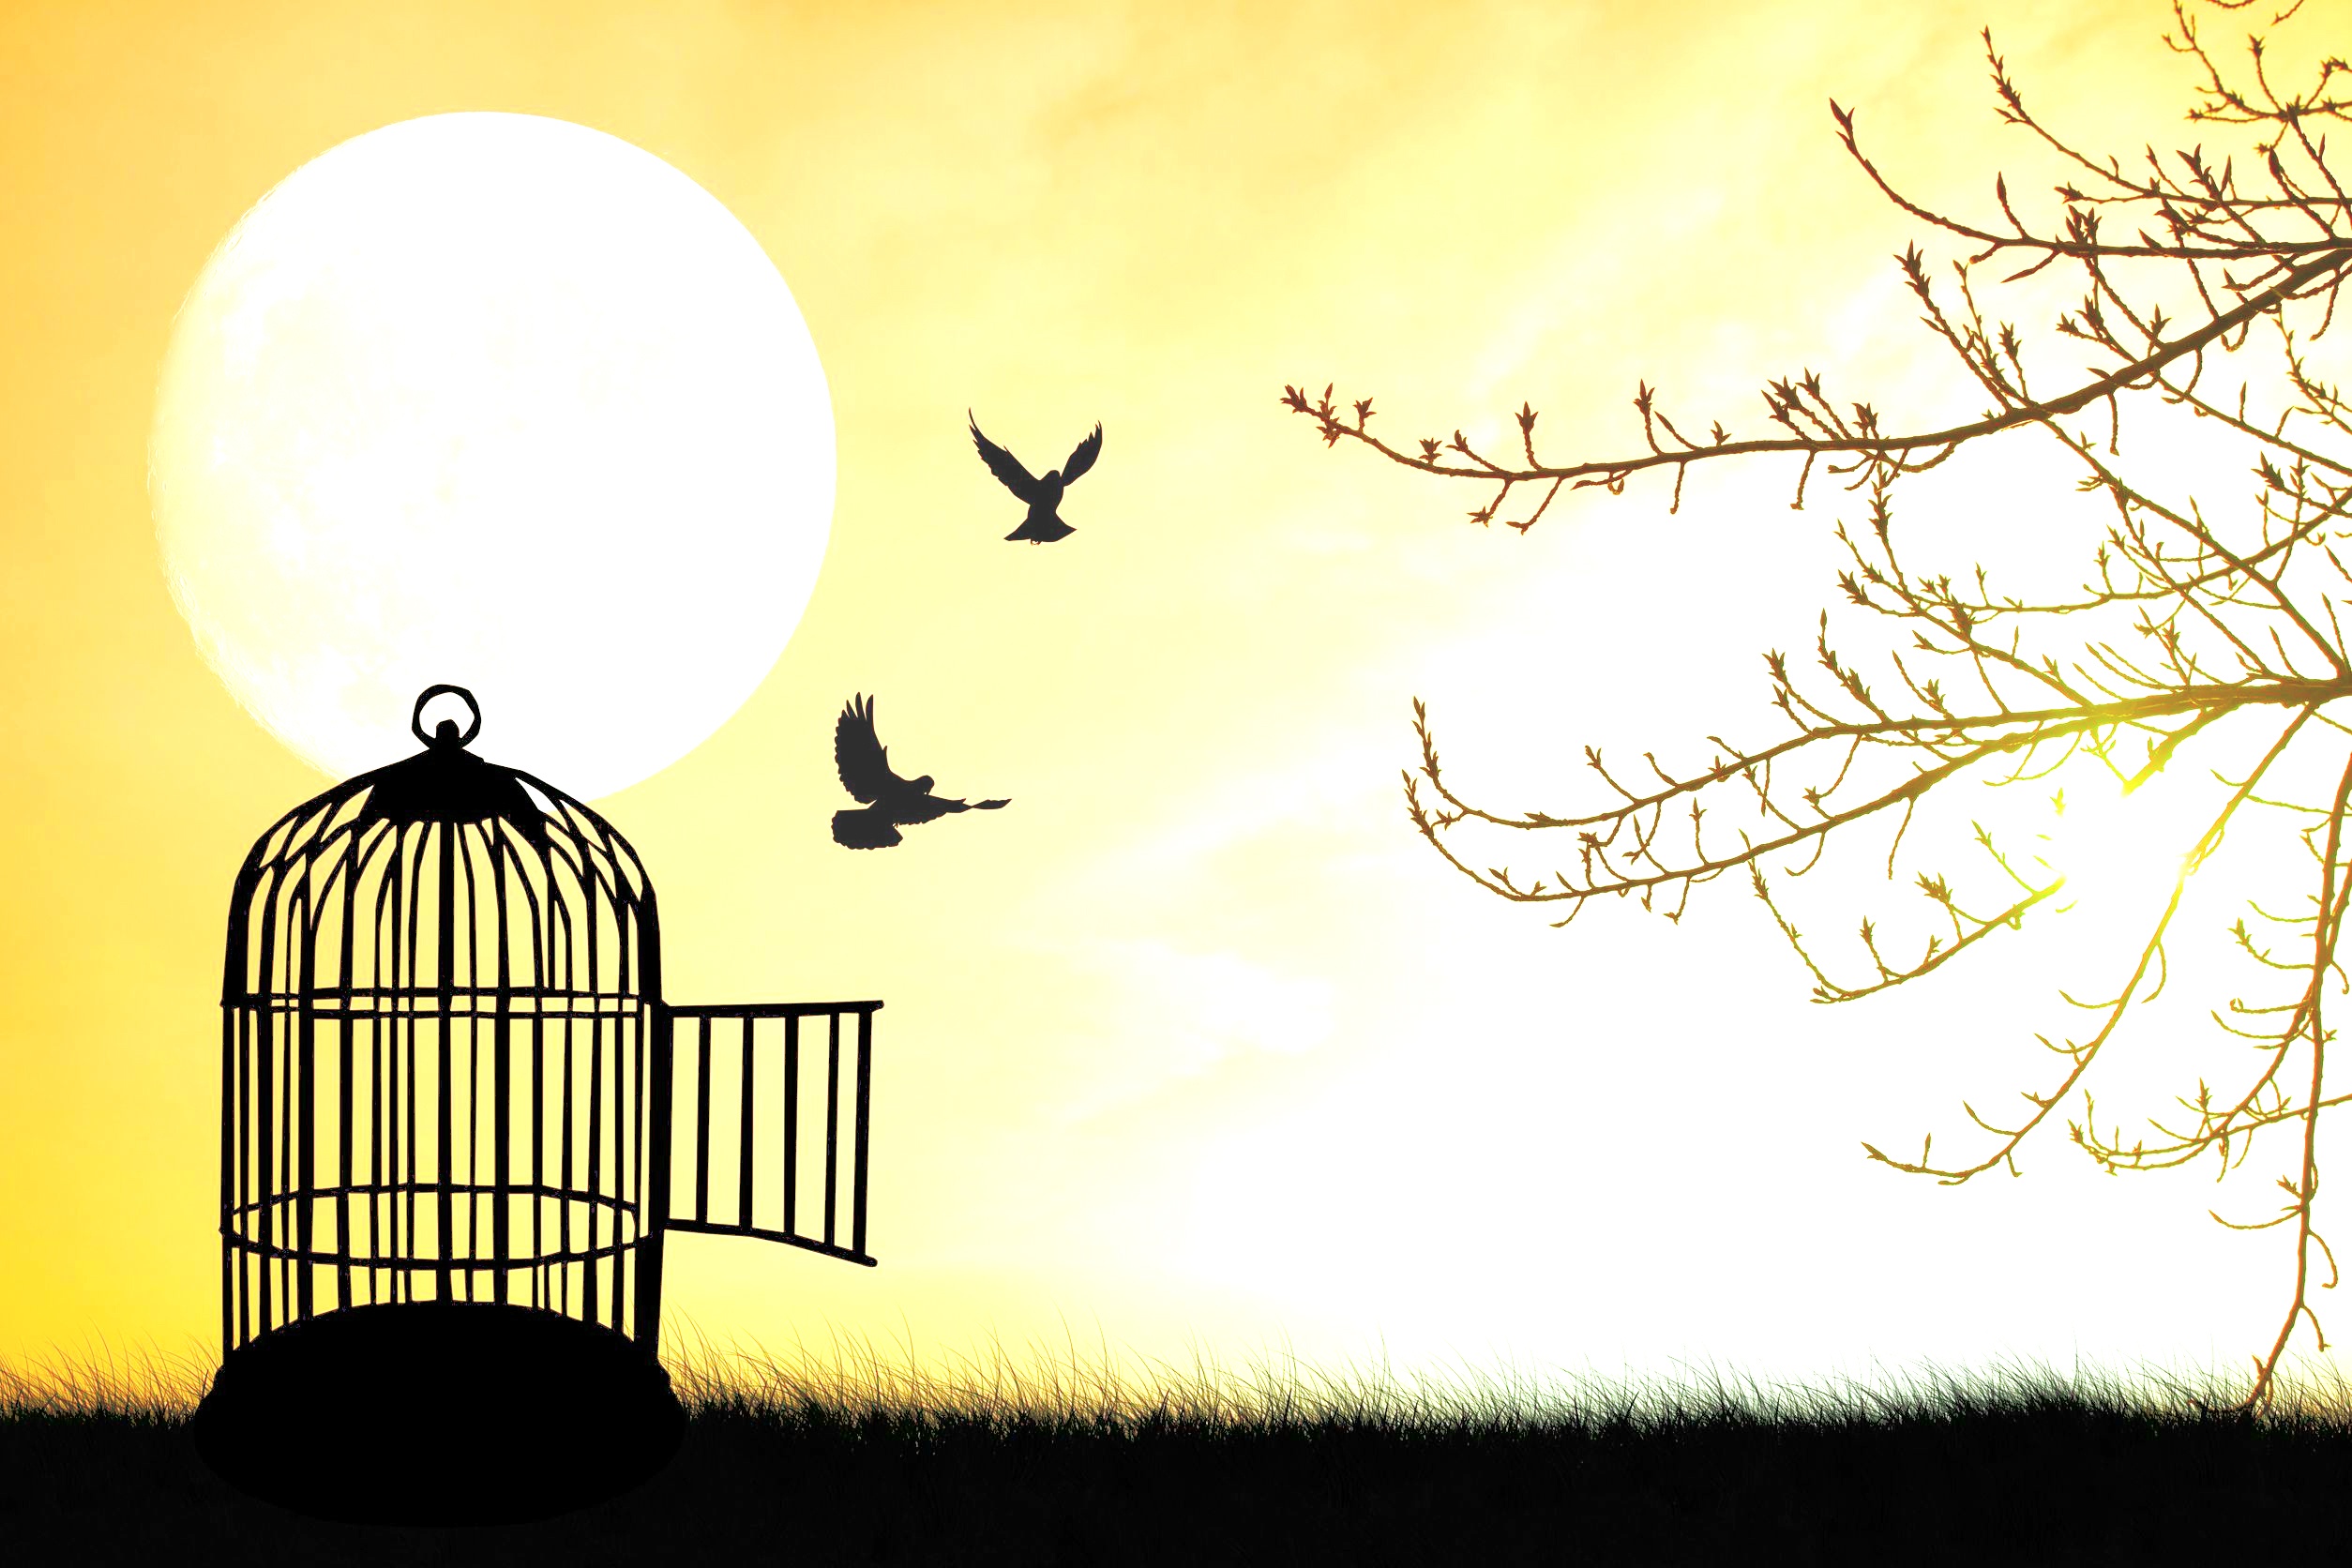 Birds-out-of-cage-moon-2.jpg